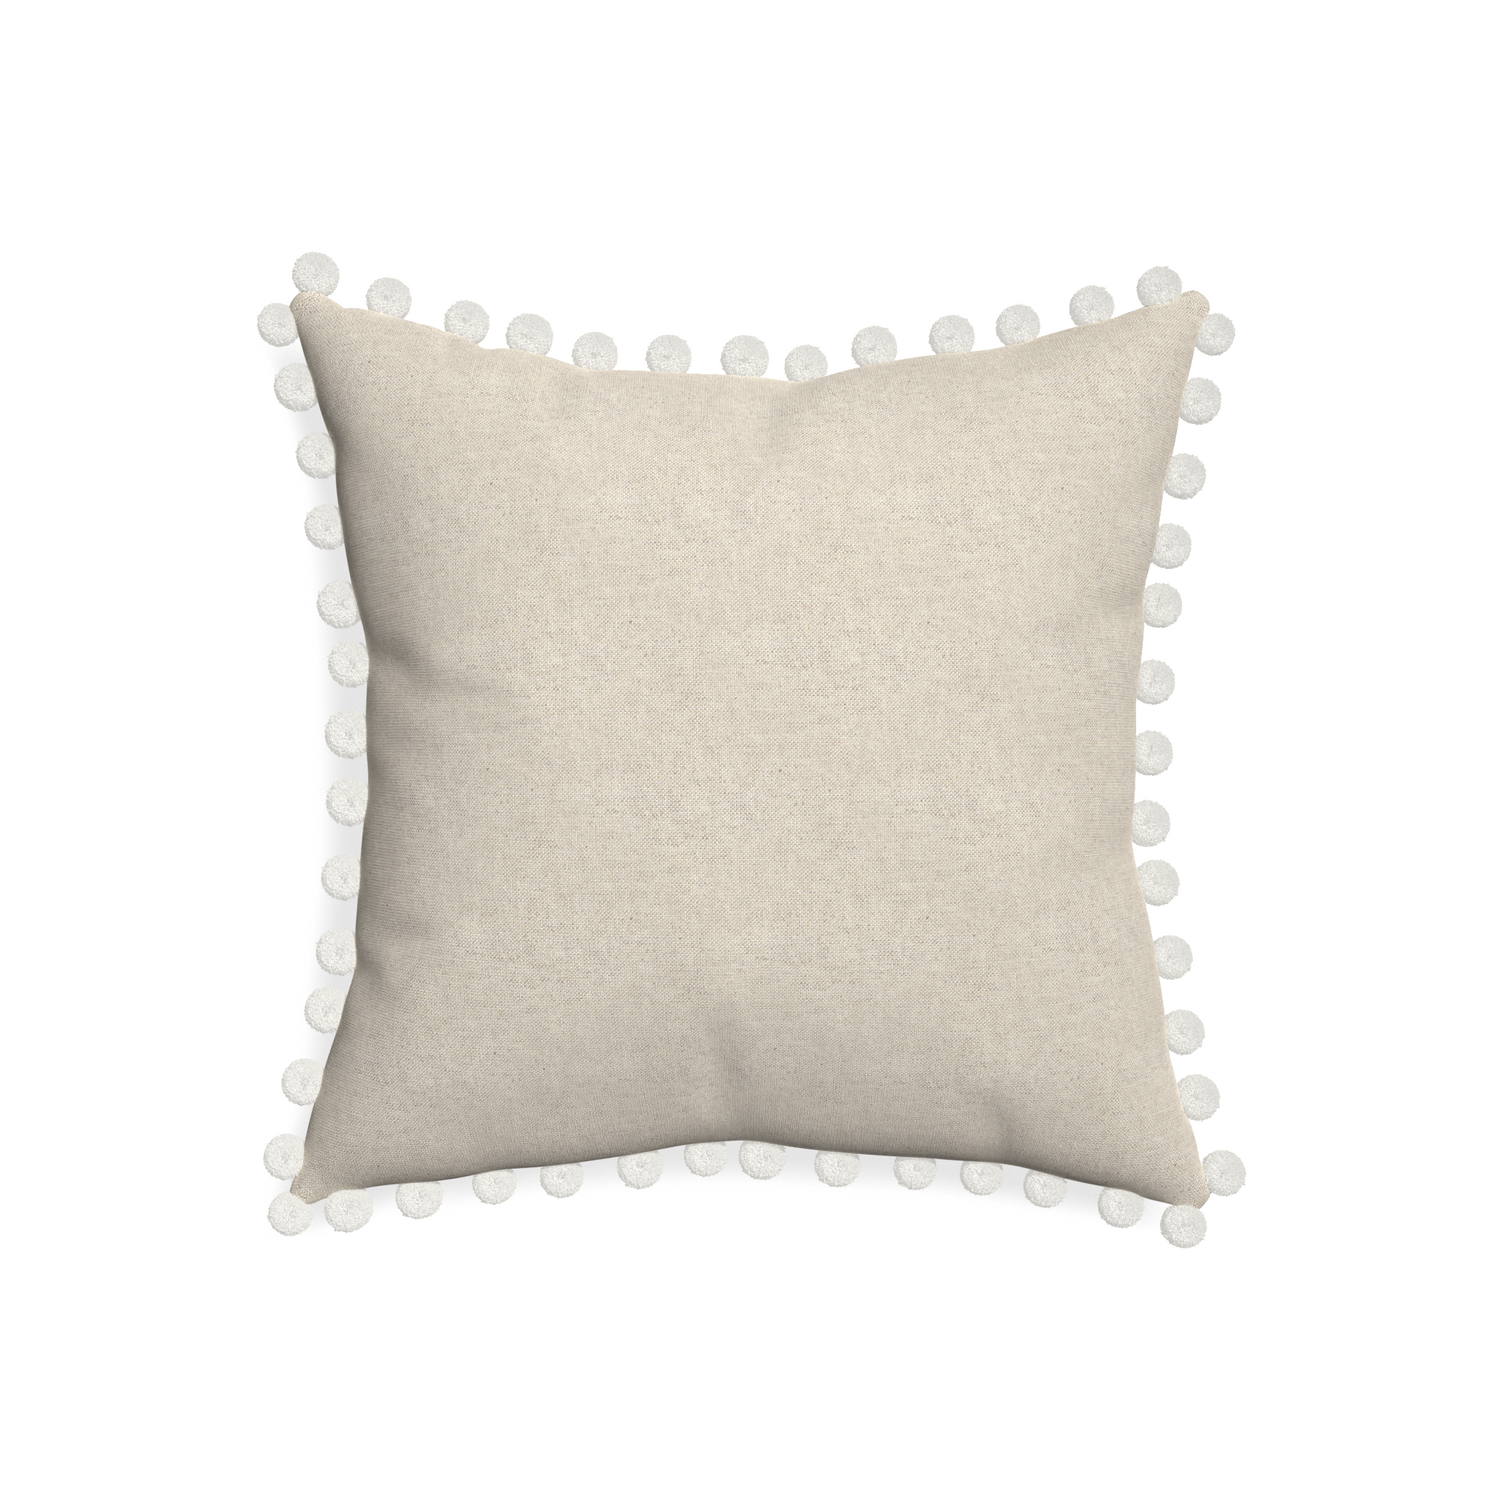 20-square oat custom light brownpillow with snow pom pom on white background